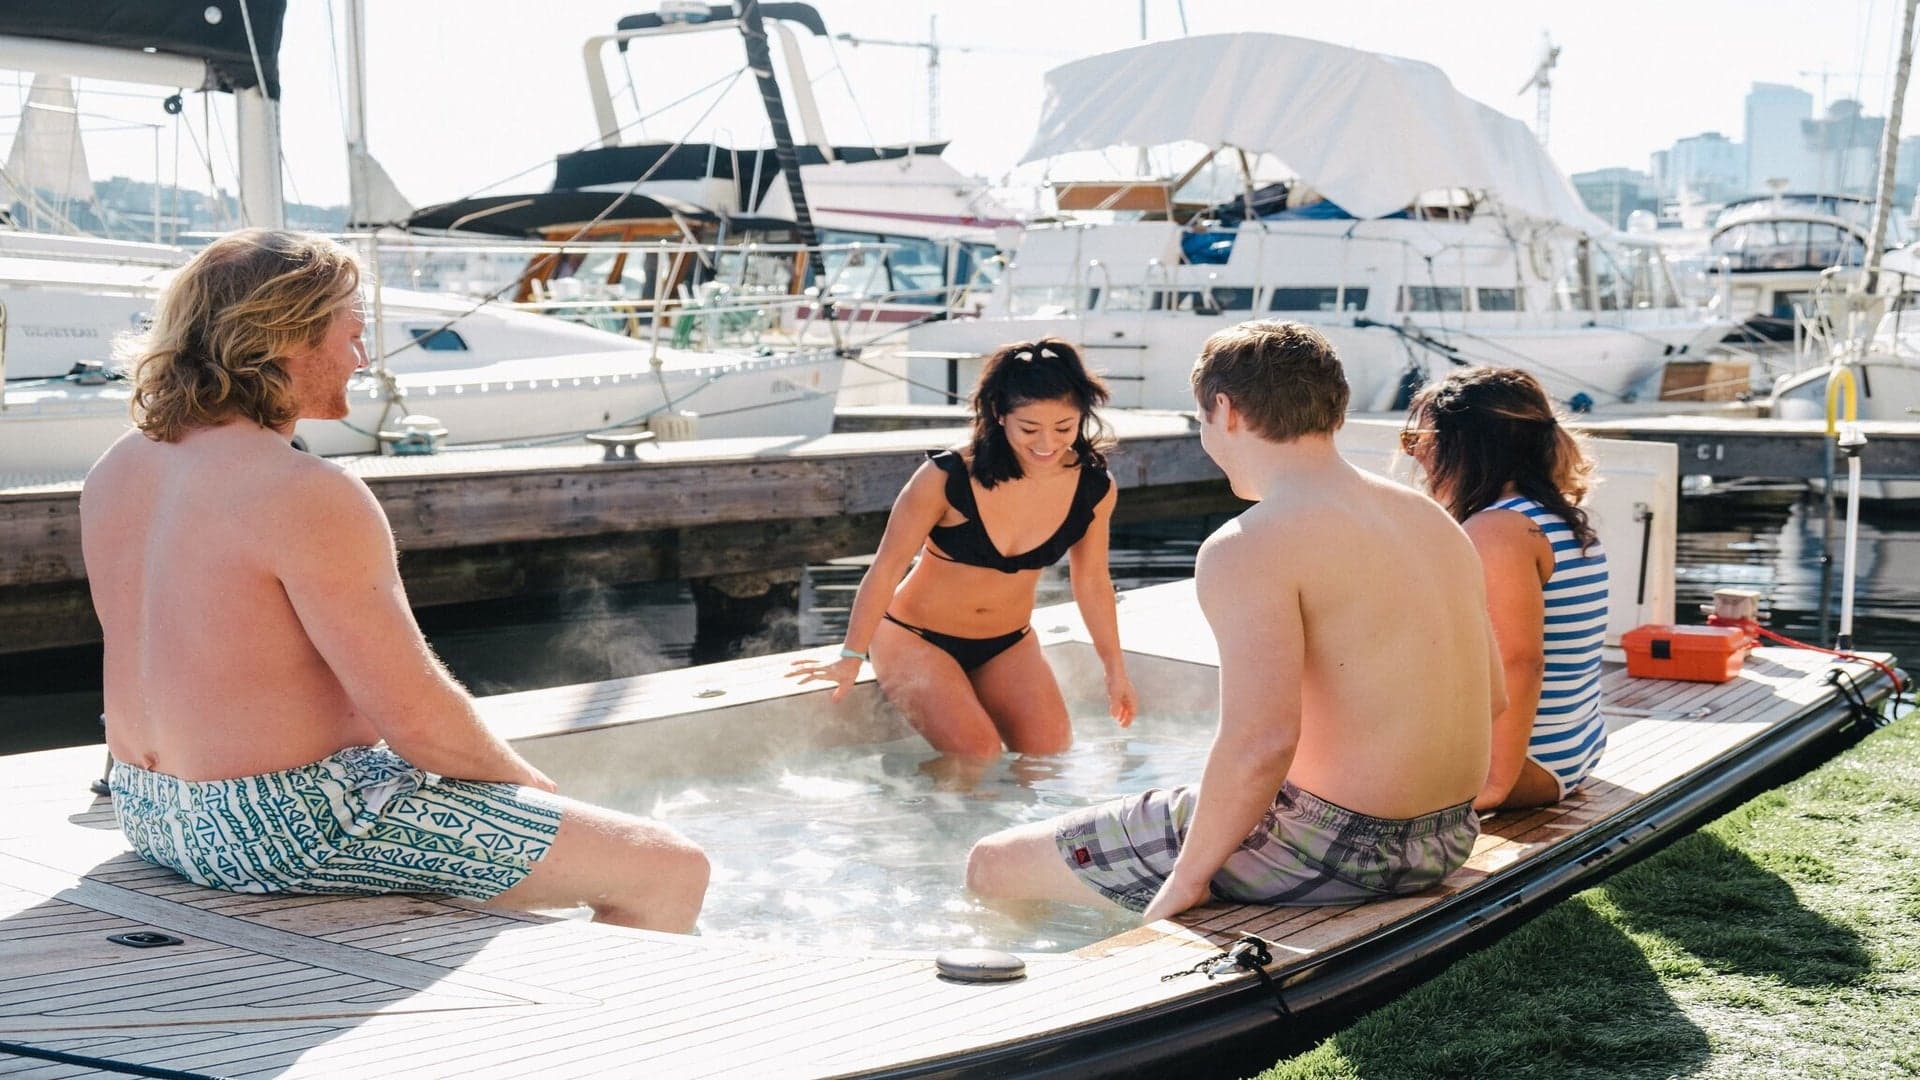 You Can Now Rent a Hot Tub Boat Through Turo